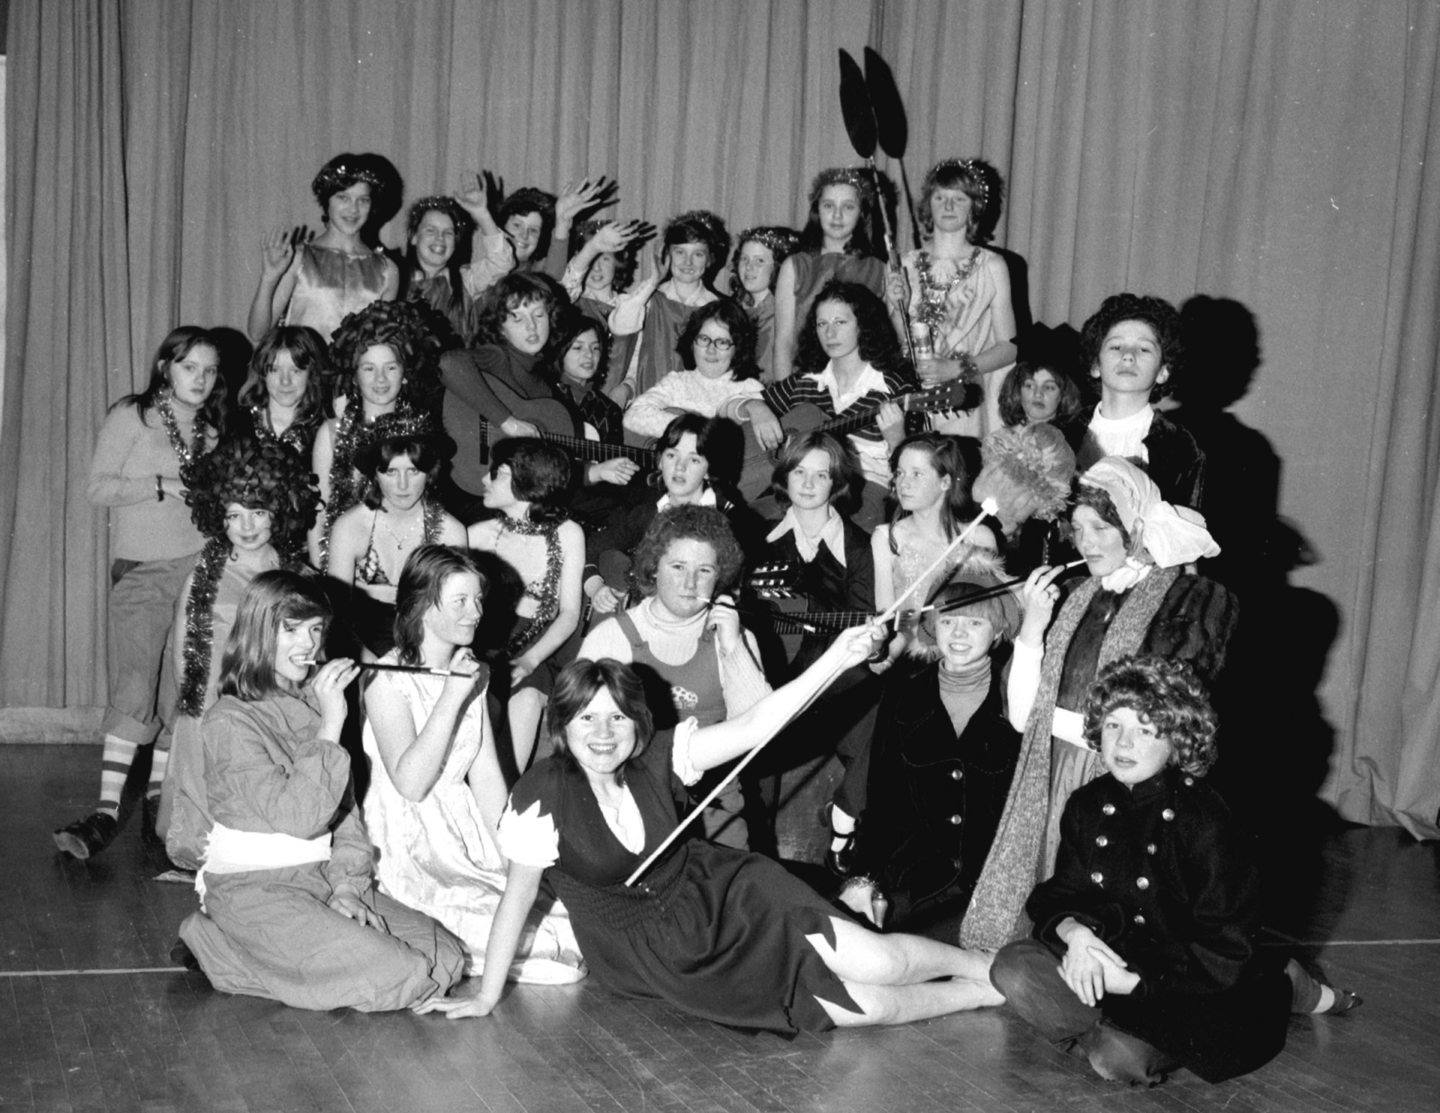 Taking a break from rehearsals were these Summerhill Academy pupils who were staging their version of Cinderella in December 1976.